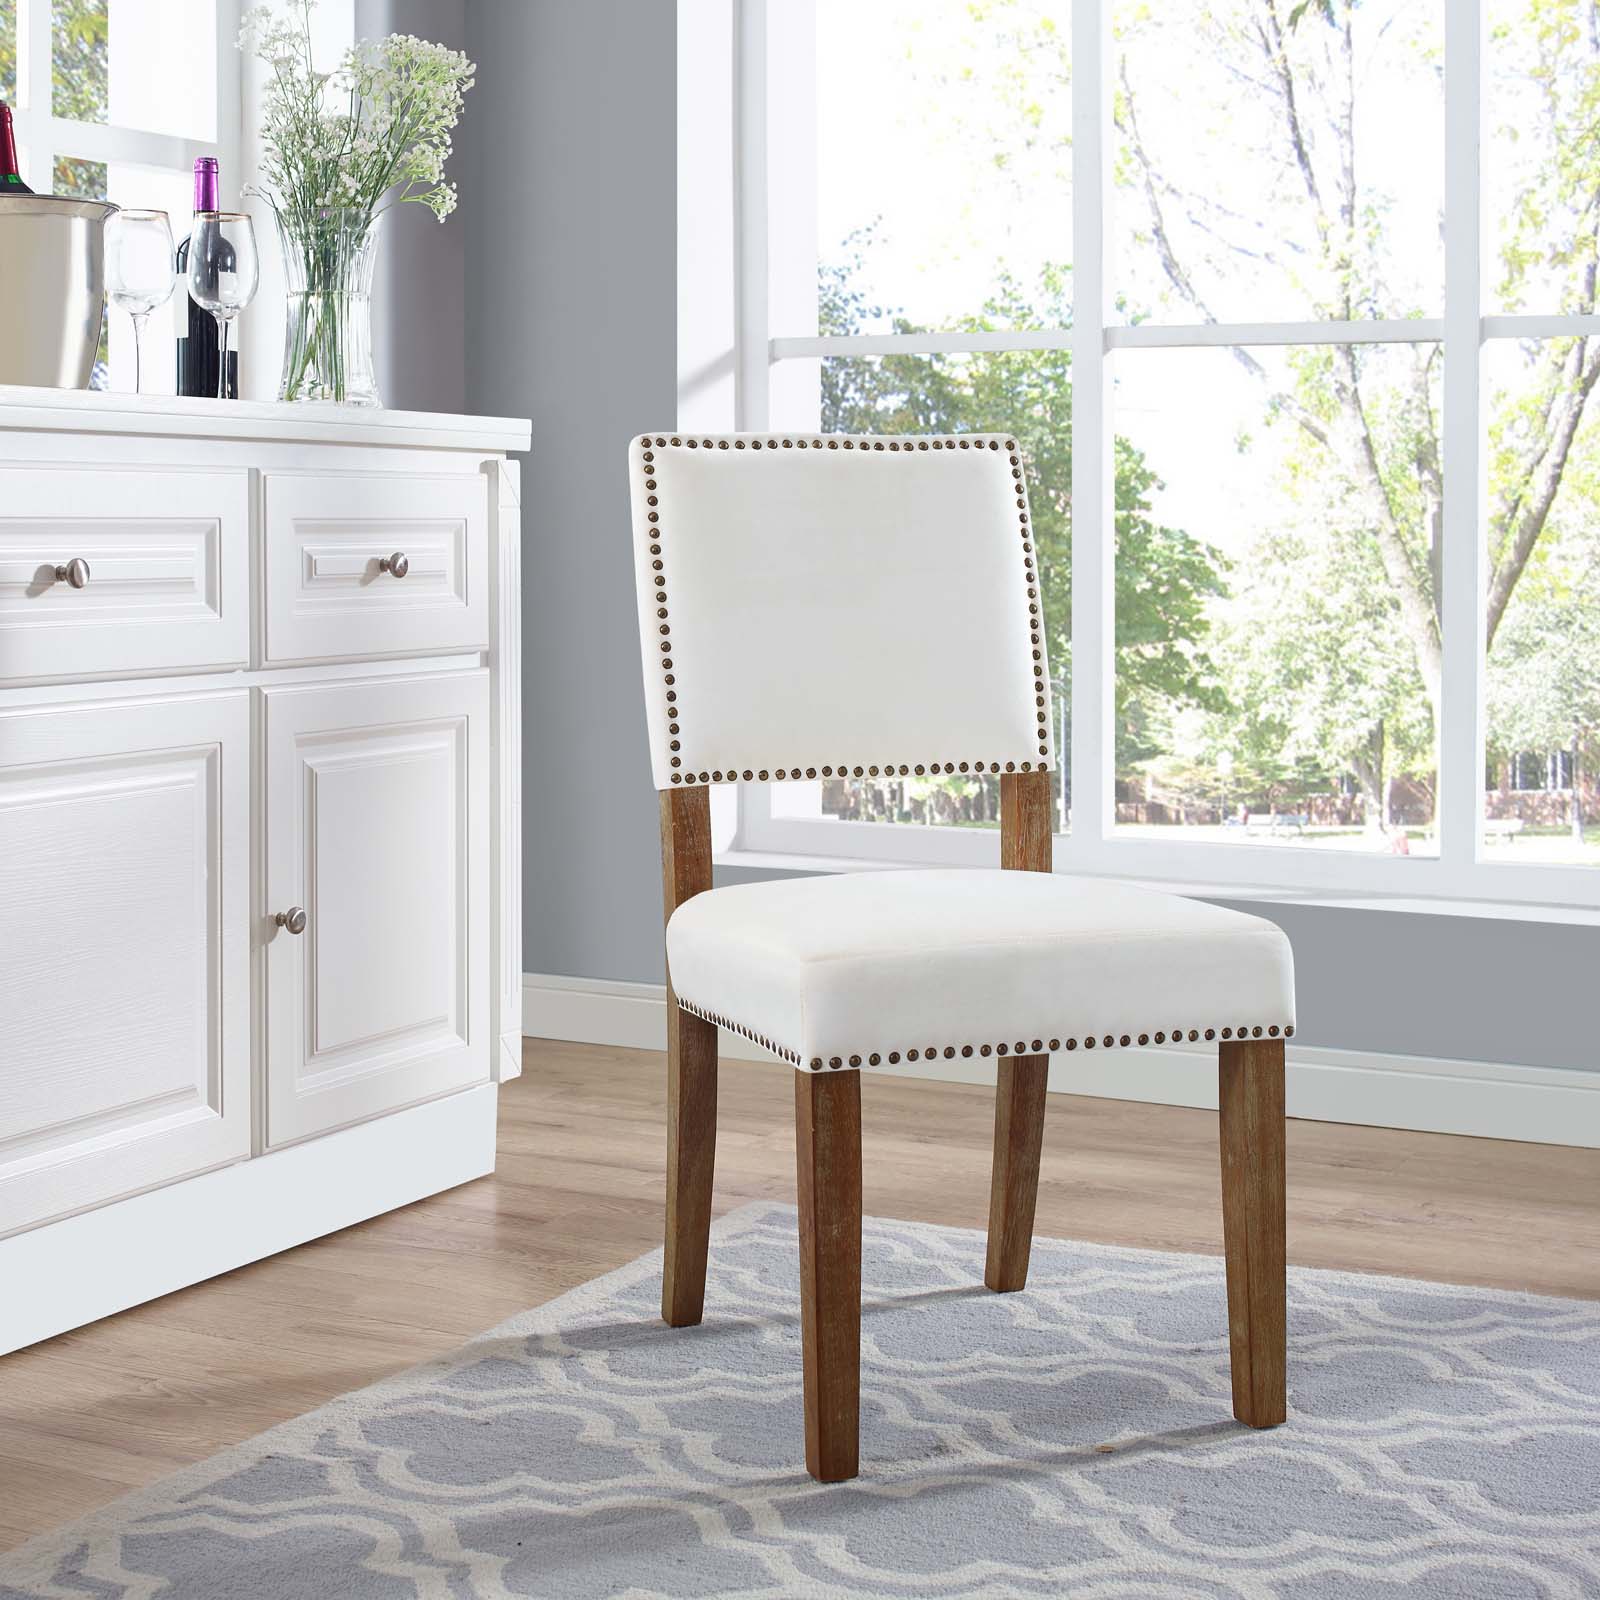 Oblige Wood Dining Chair - East Shore Modern Home Furnishings